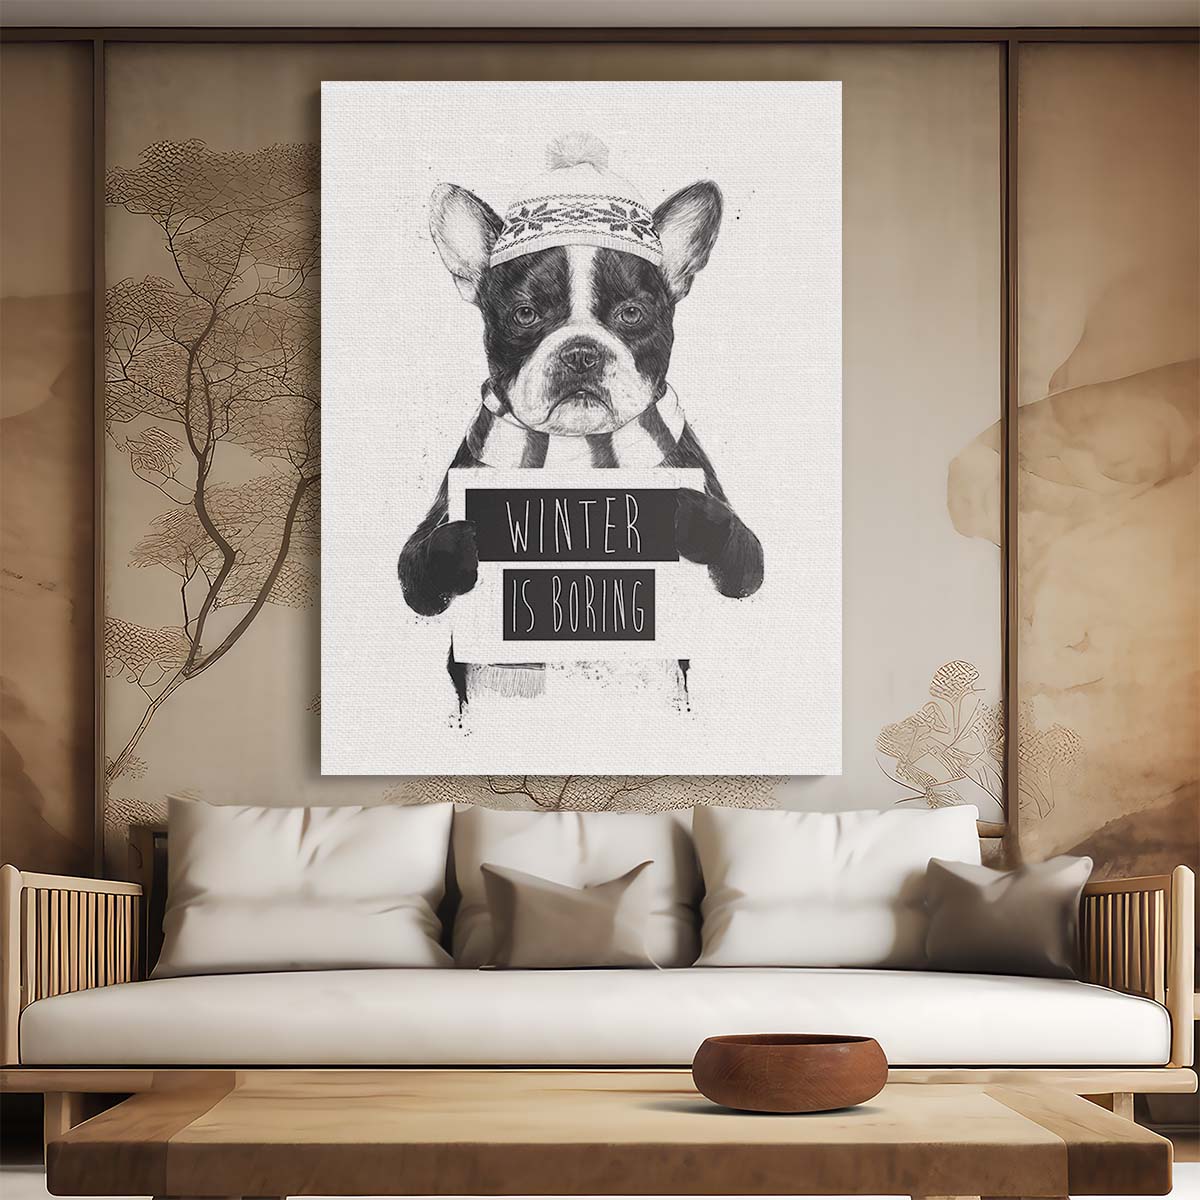 Funny Bulldog Winter Illustration, Christmas Animal Wall Art by Luxuriance Designs, made in USA